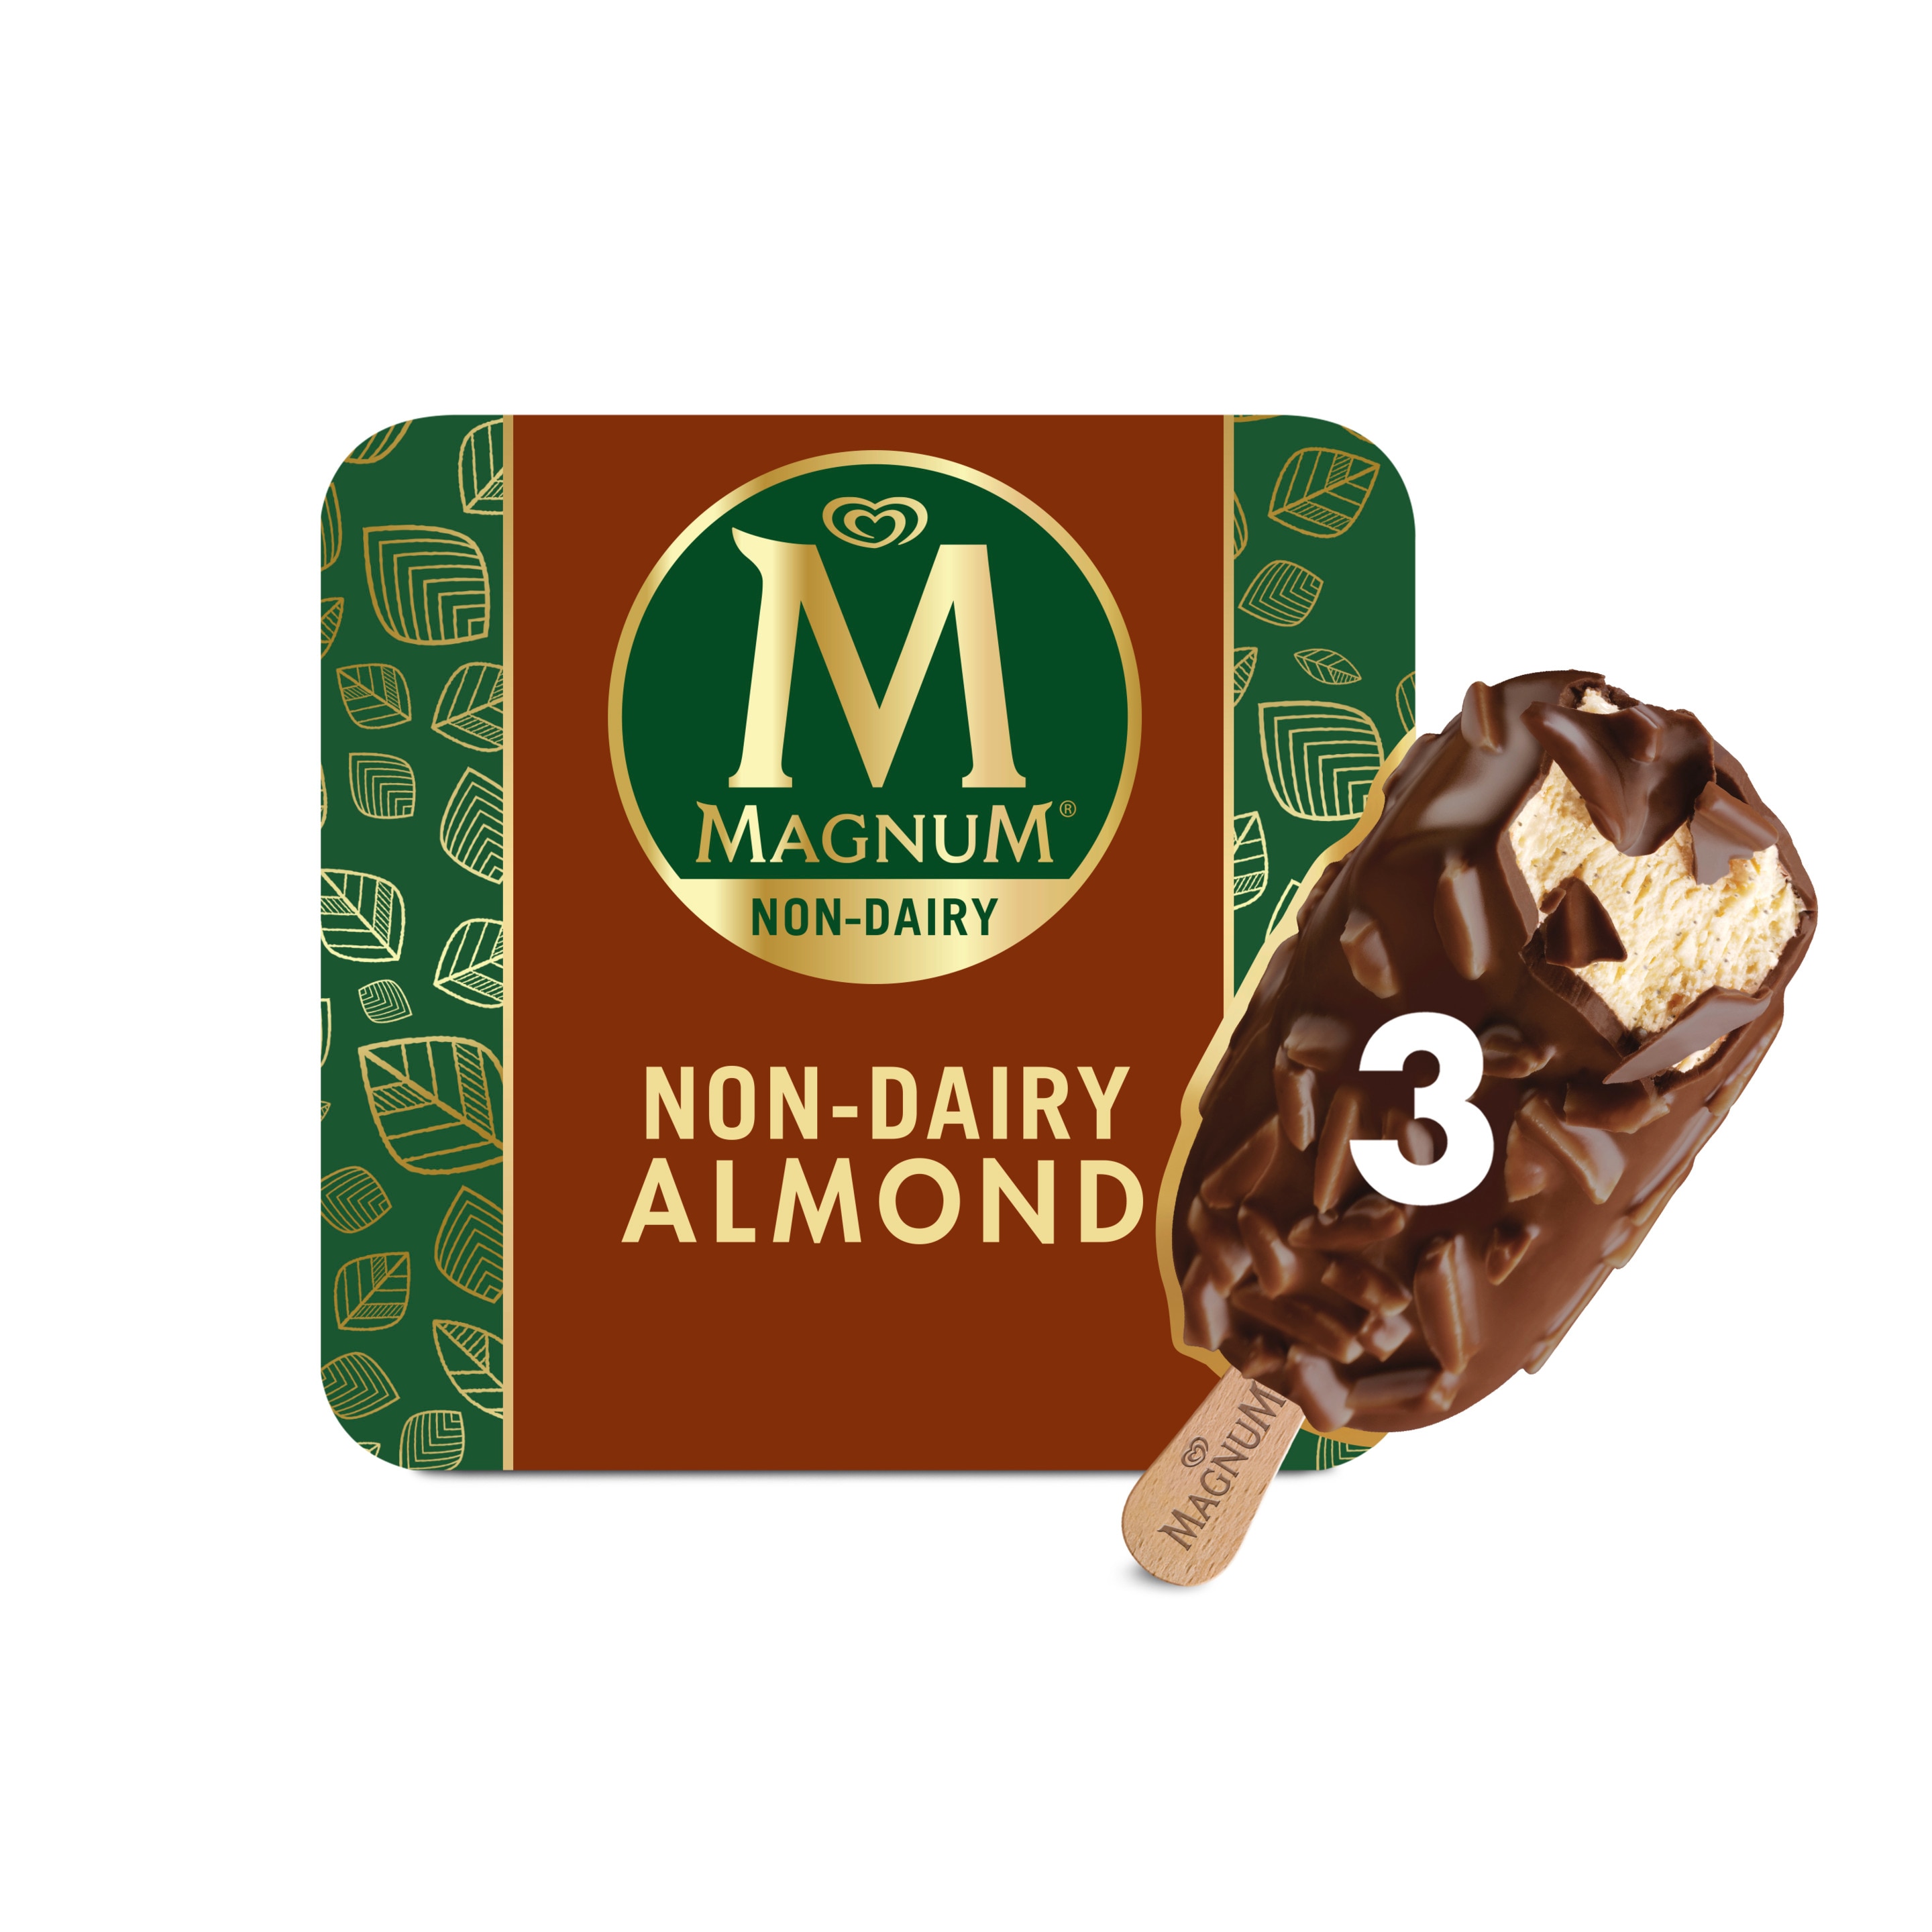 Magnum Non-Dairy Almond Bar Front of Pack